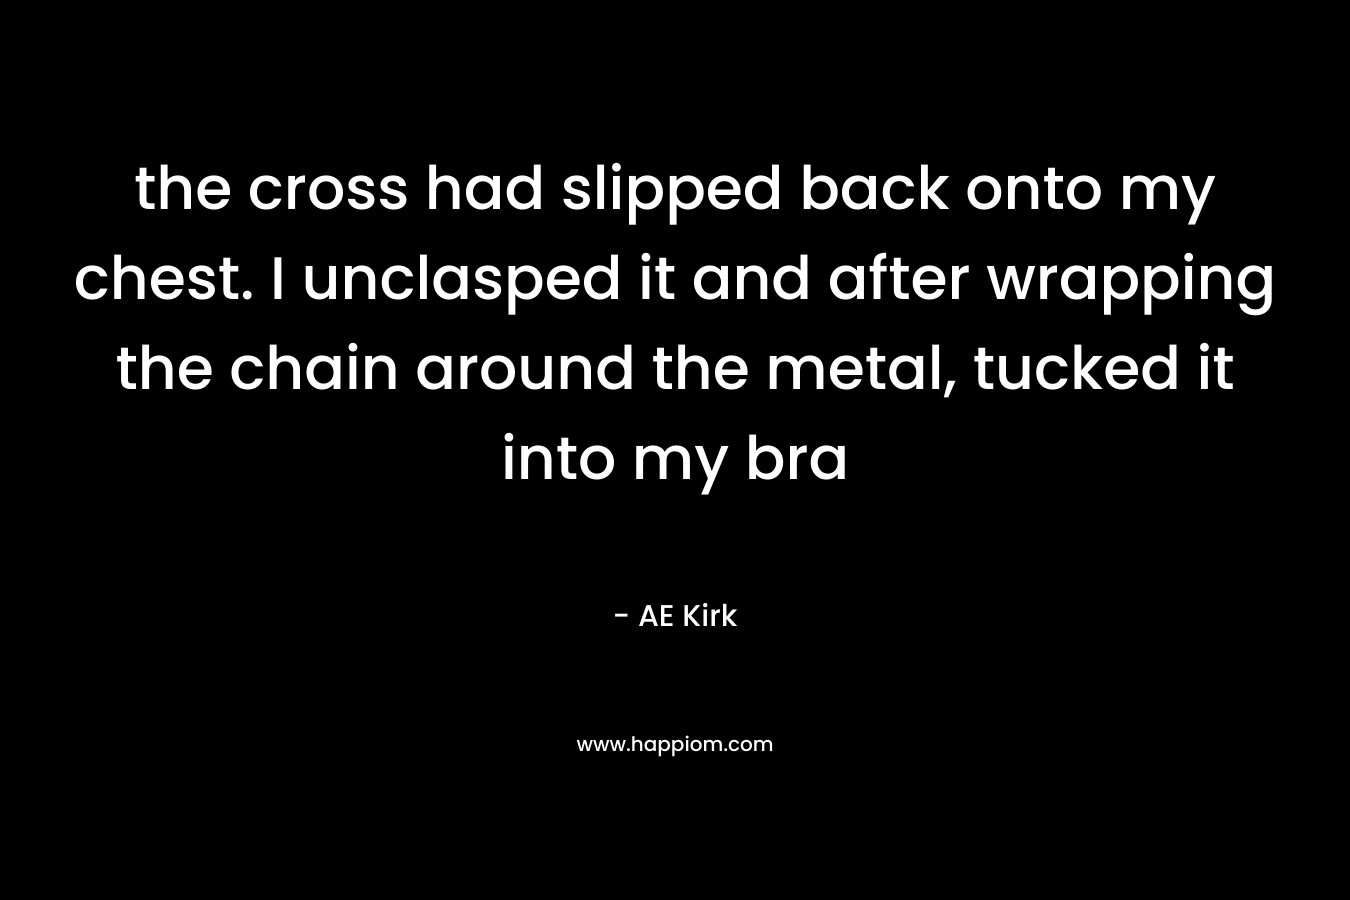 the cross had slipped back onto my chest. I unclasped it and after wrapping the chain around the metal, tucked it into my bra